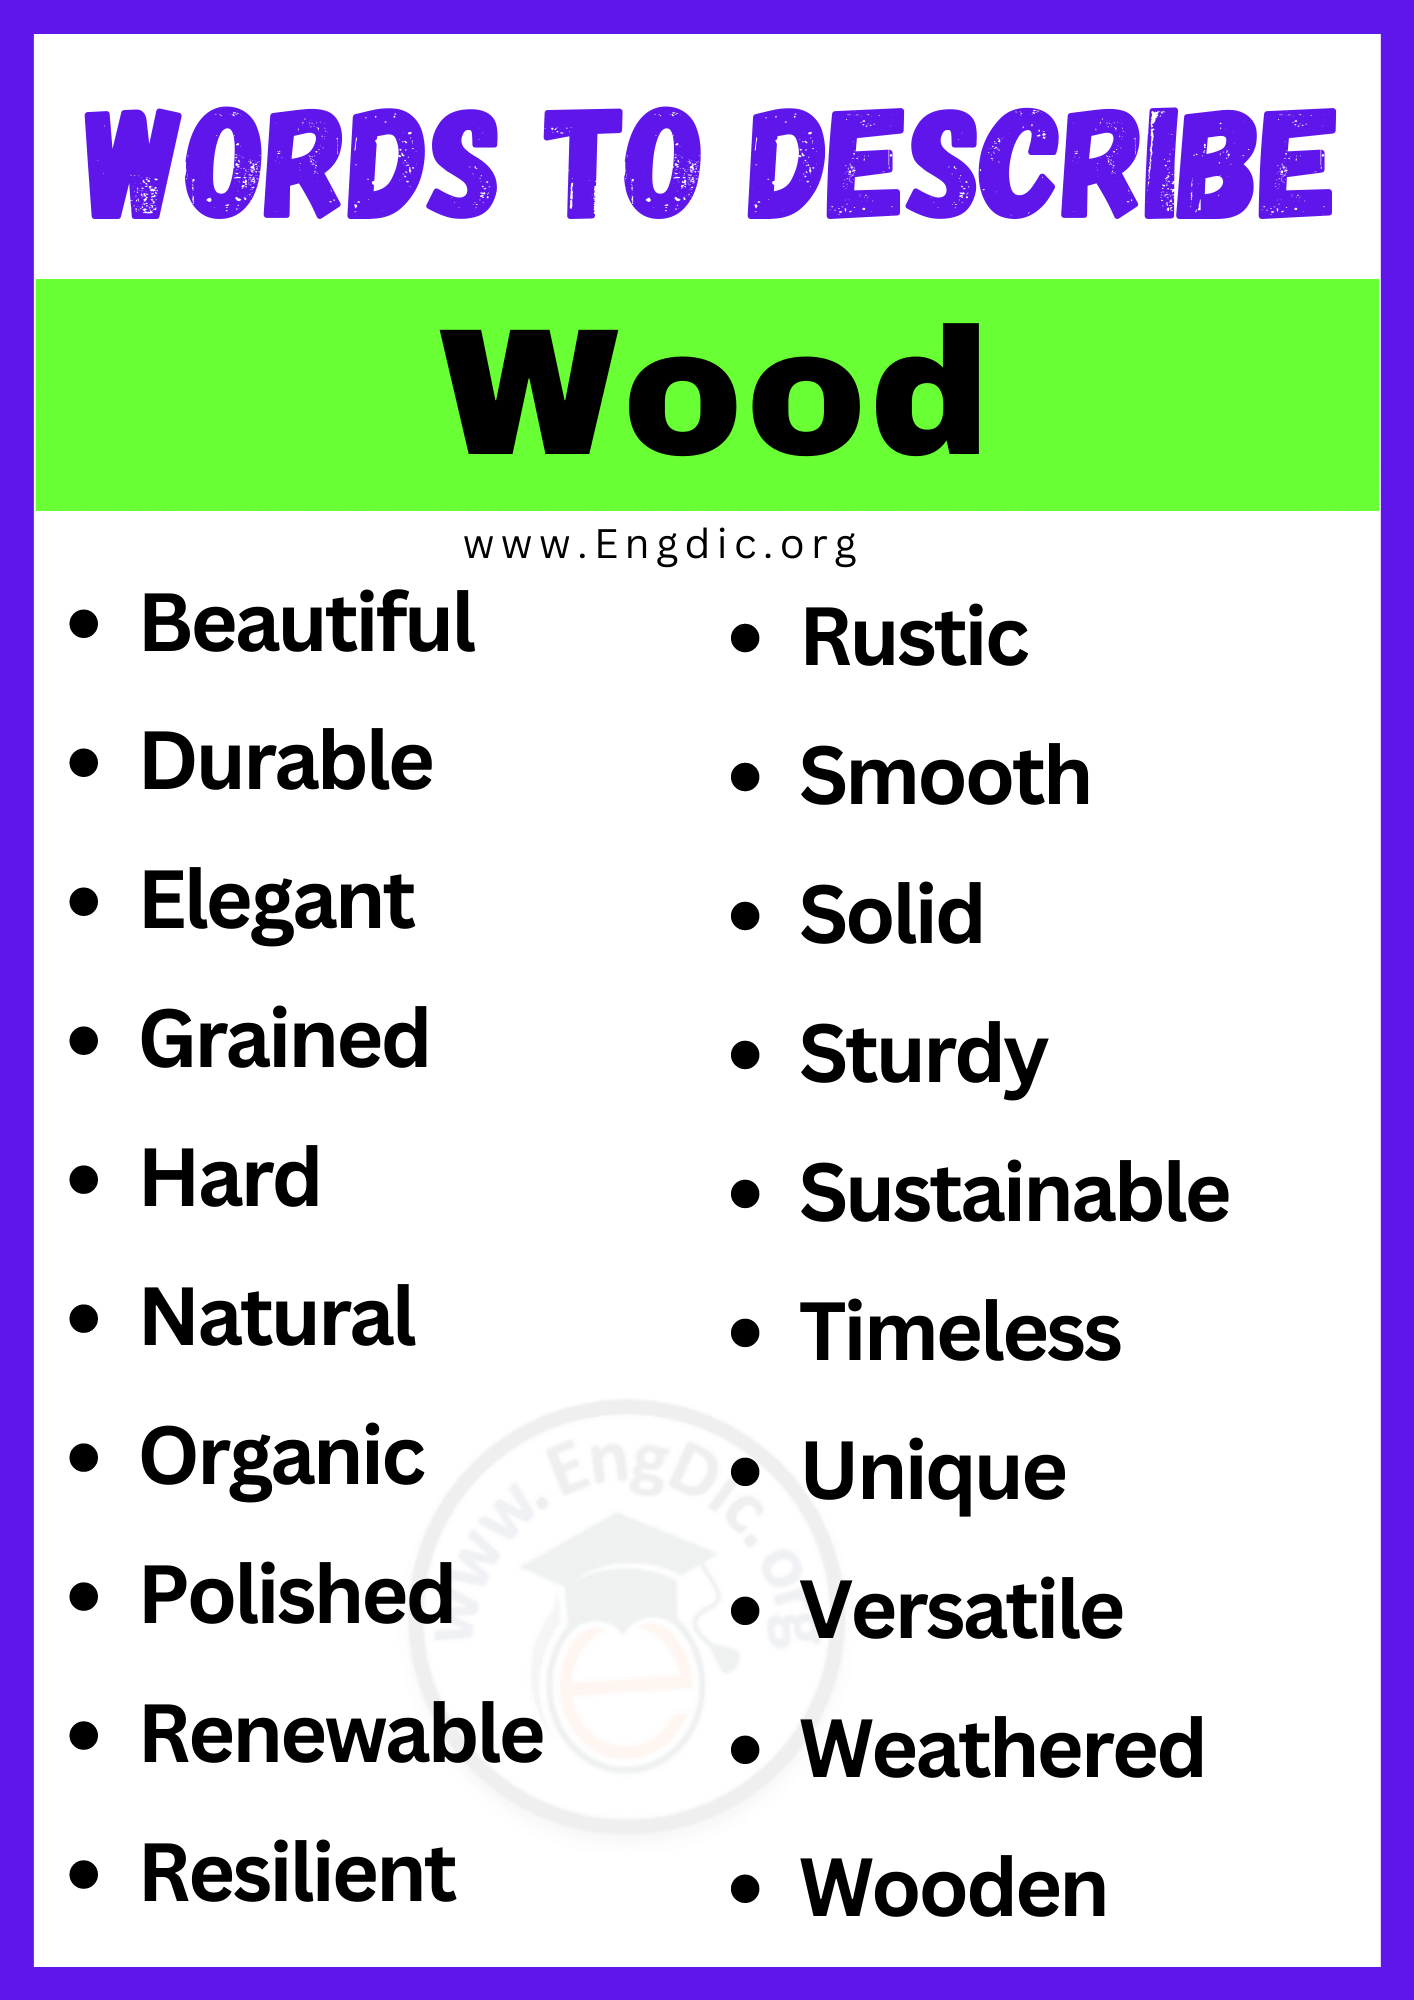 Words to Describe Wood